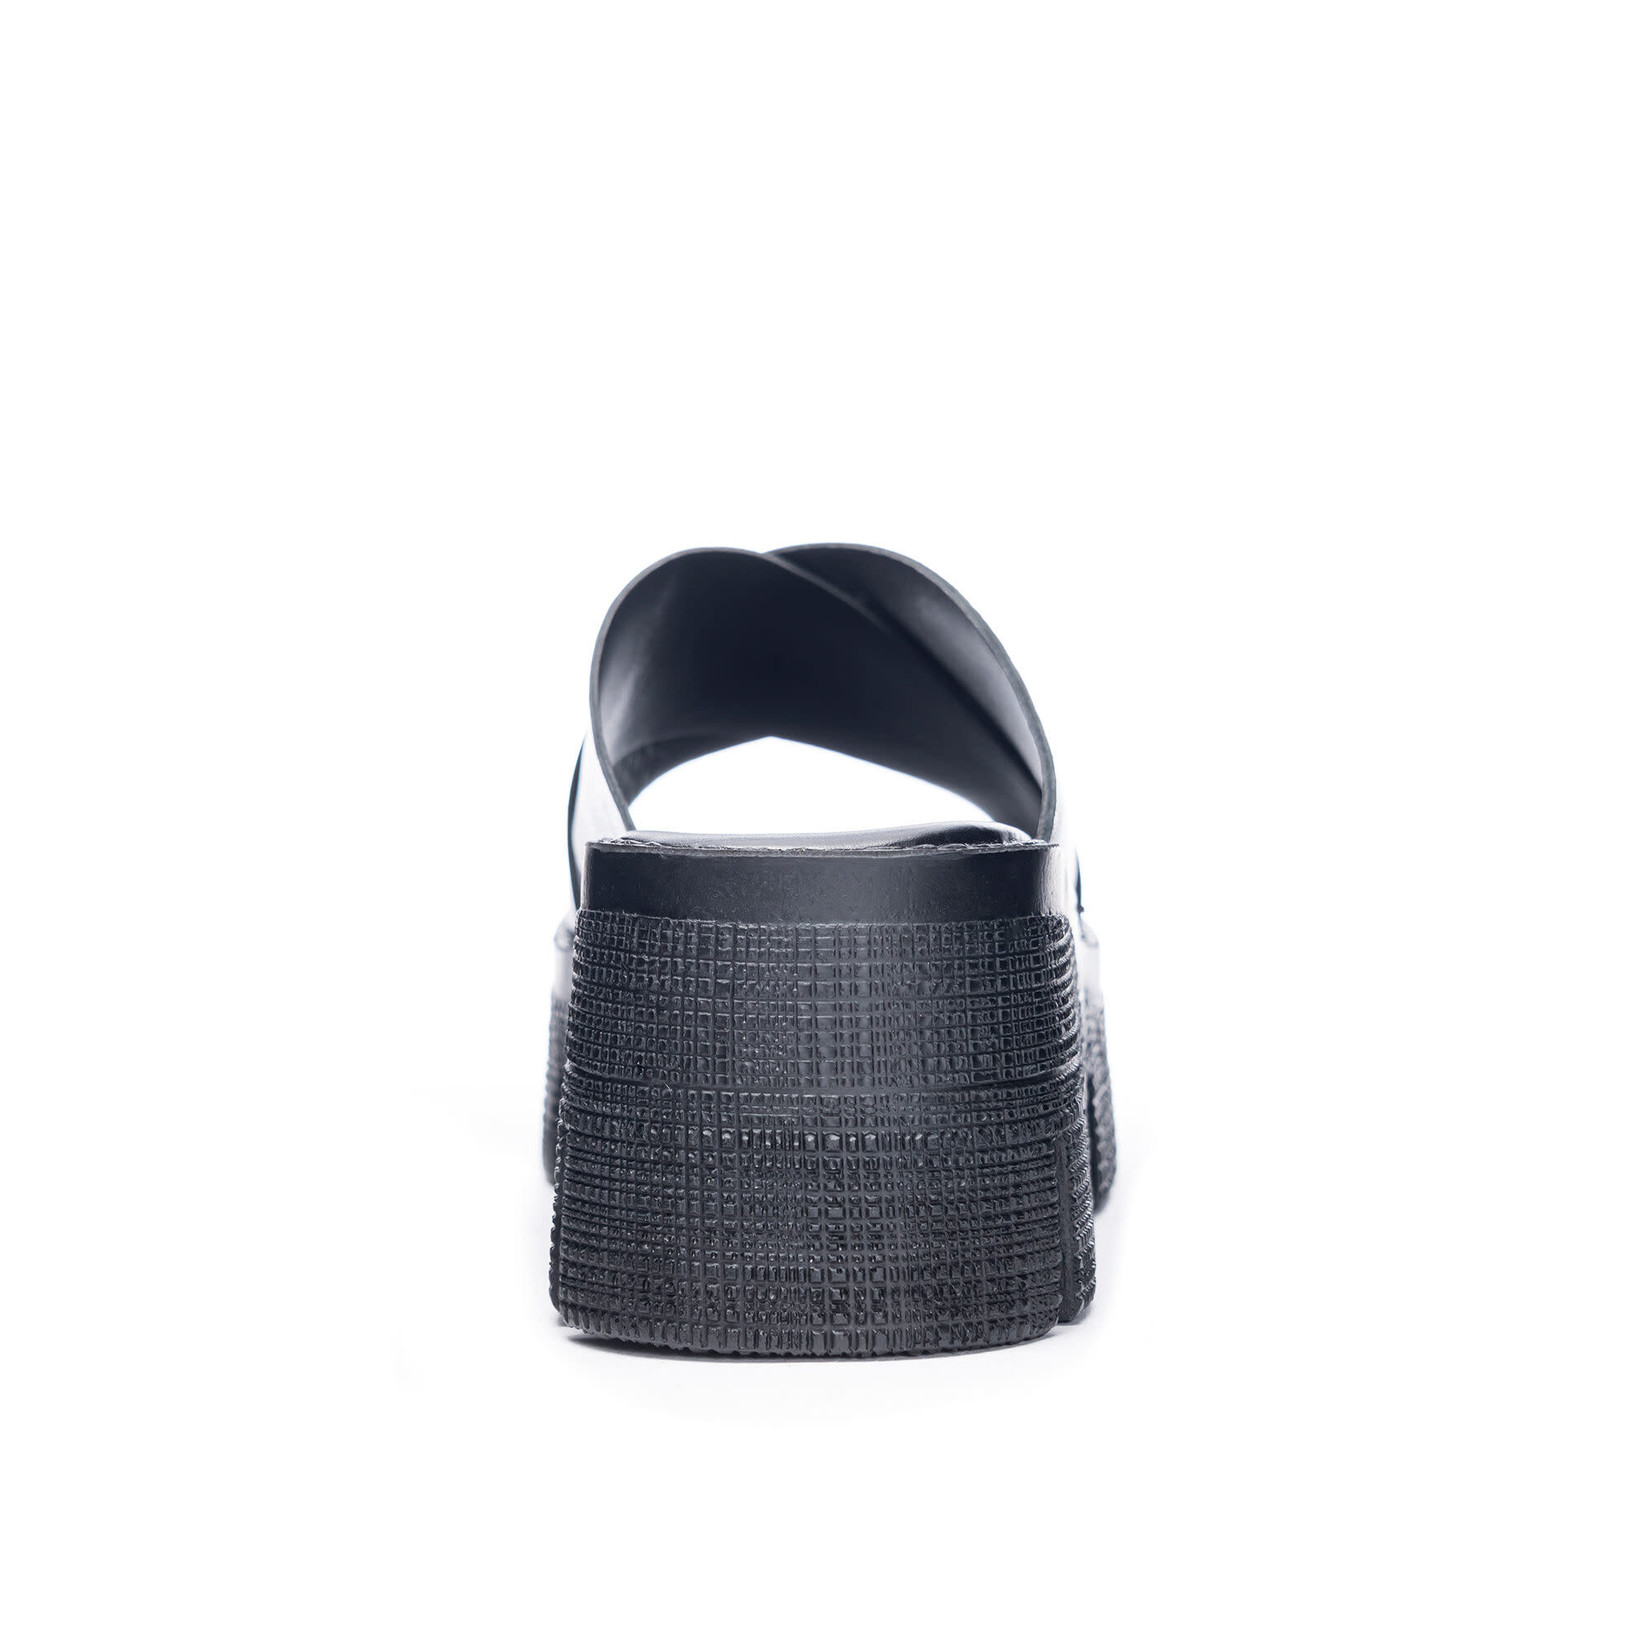 Chinese Laundry Lock Down Black Leather